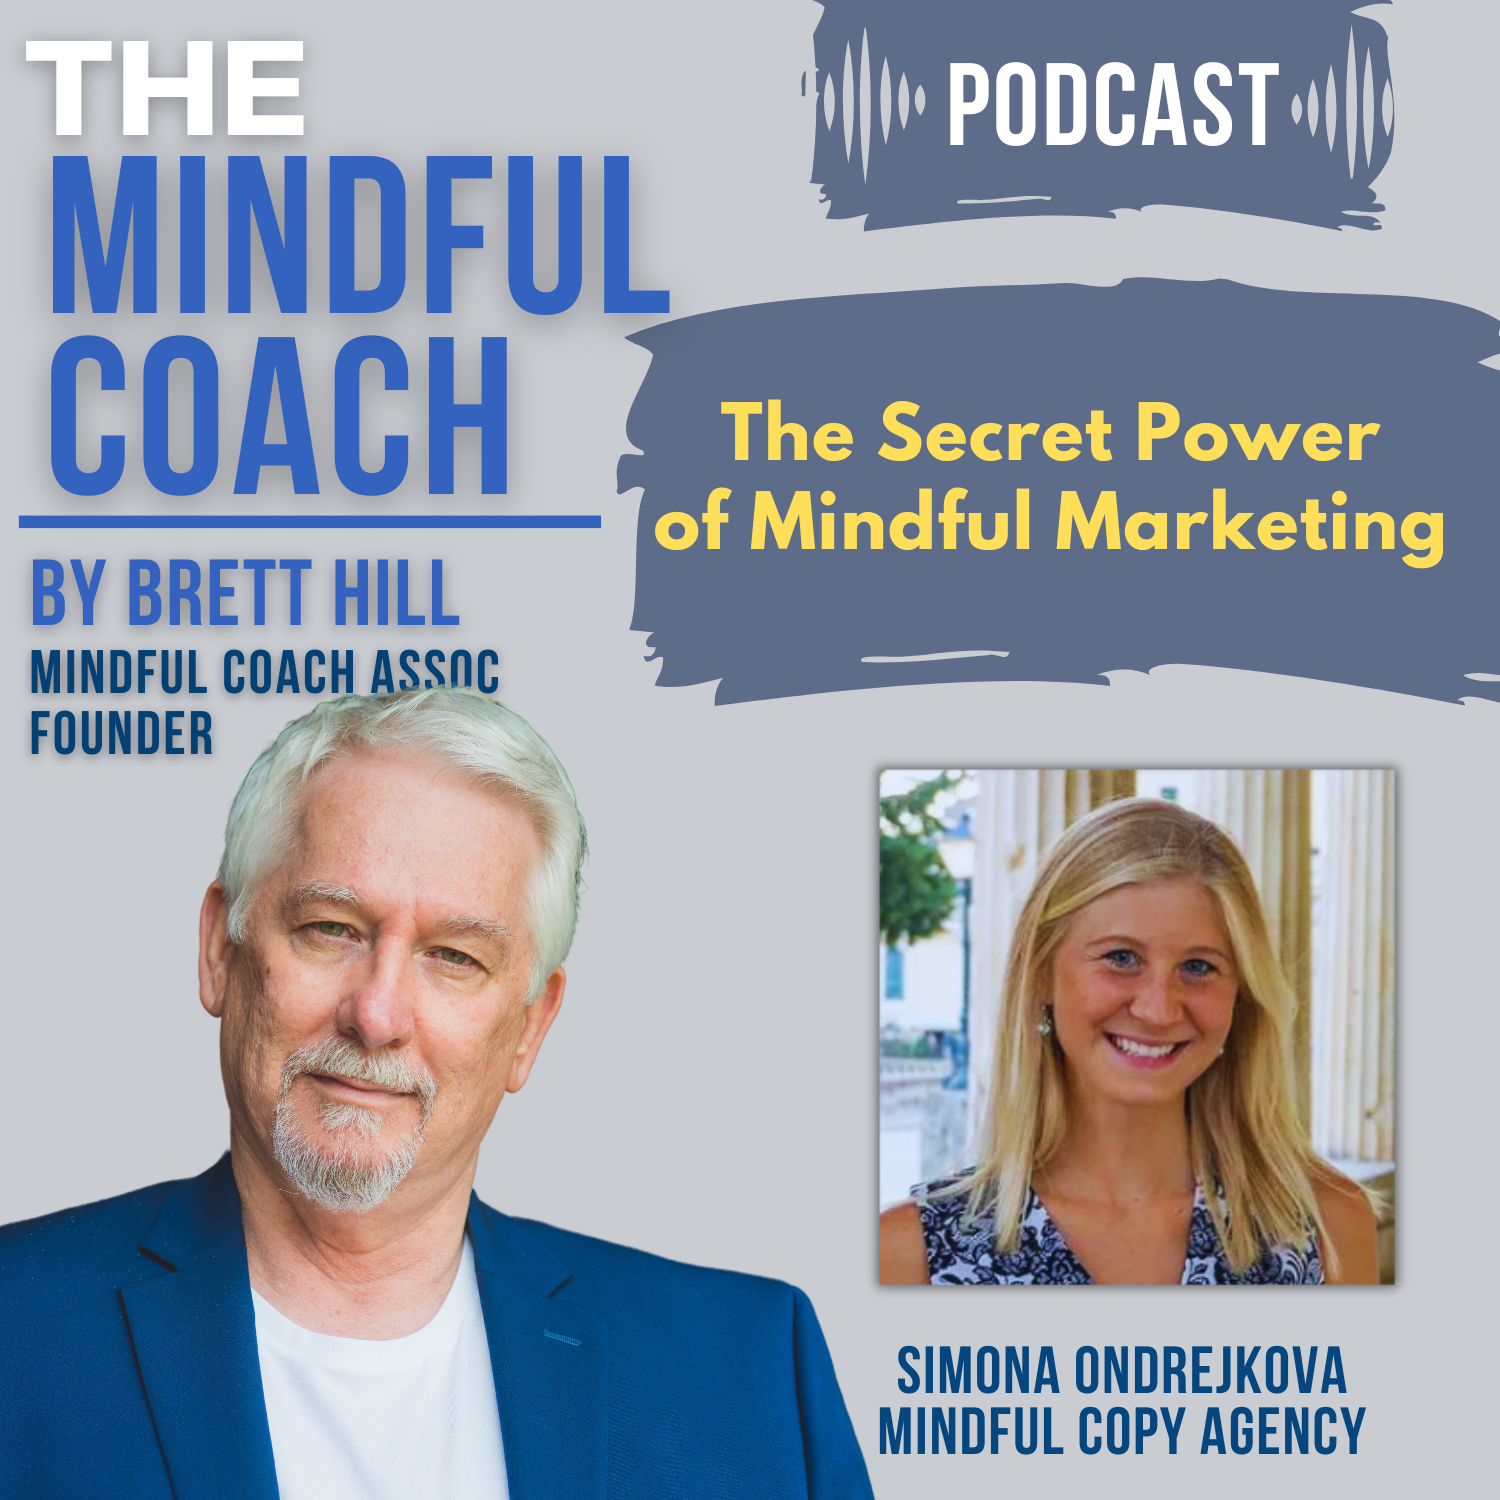 Artwork for podcast The Mindful Coach Podcast